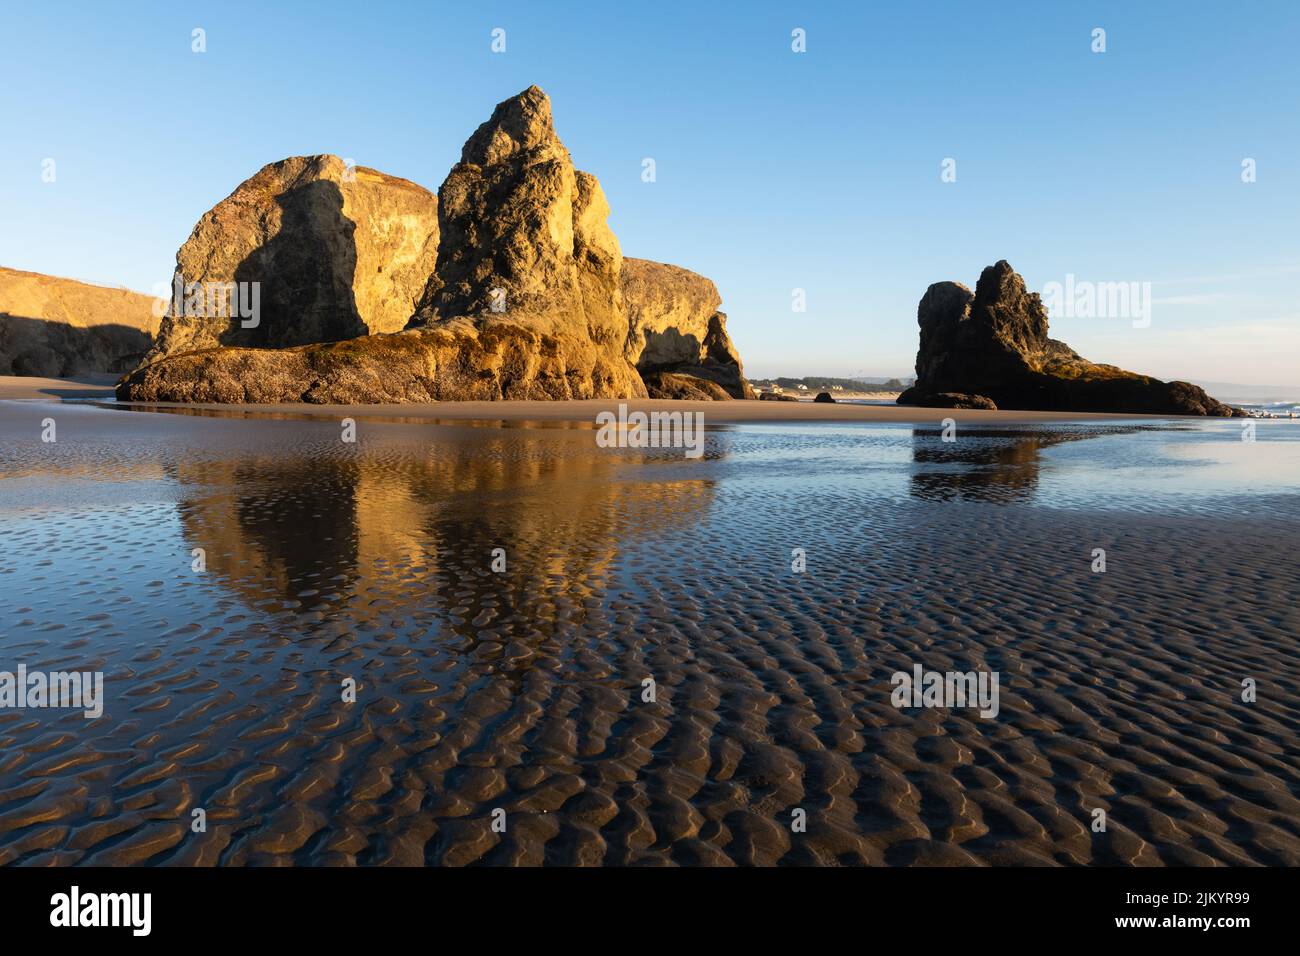 Sea stacks in evening golden light on the beach at Bandon Oregon in the Pacific Northwest with sand ripples in the foreground Stock Photo